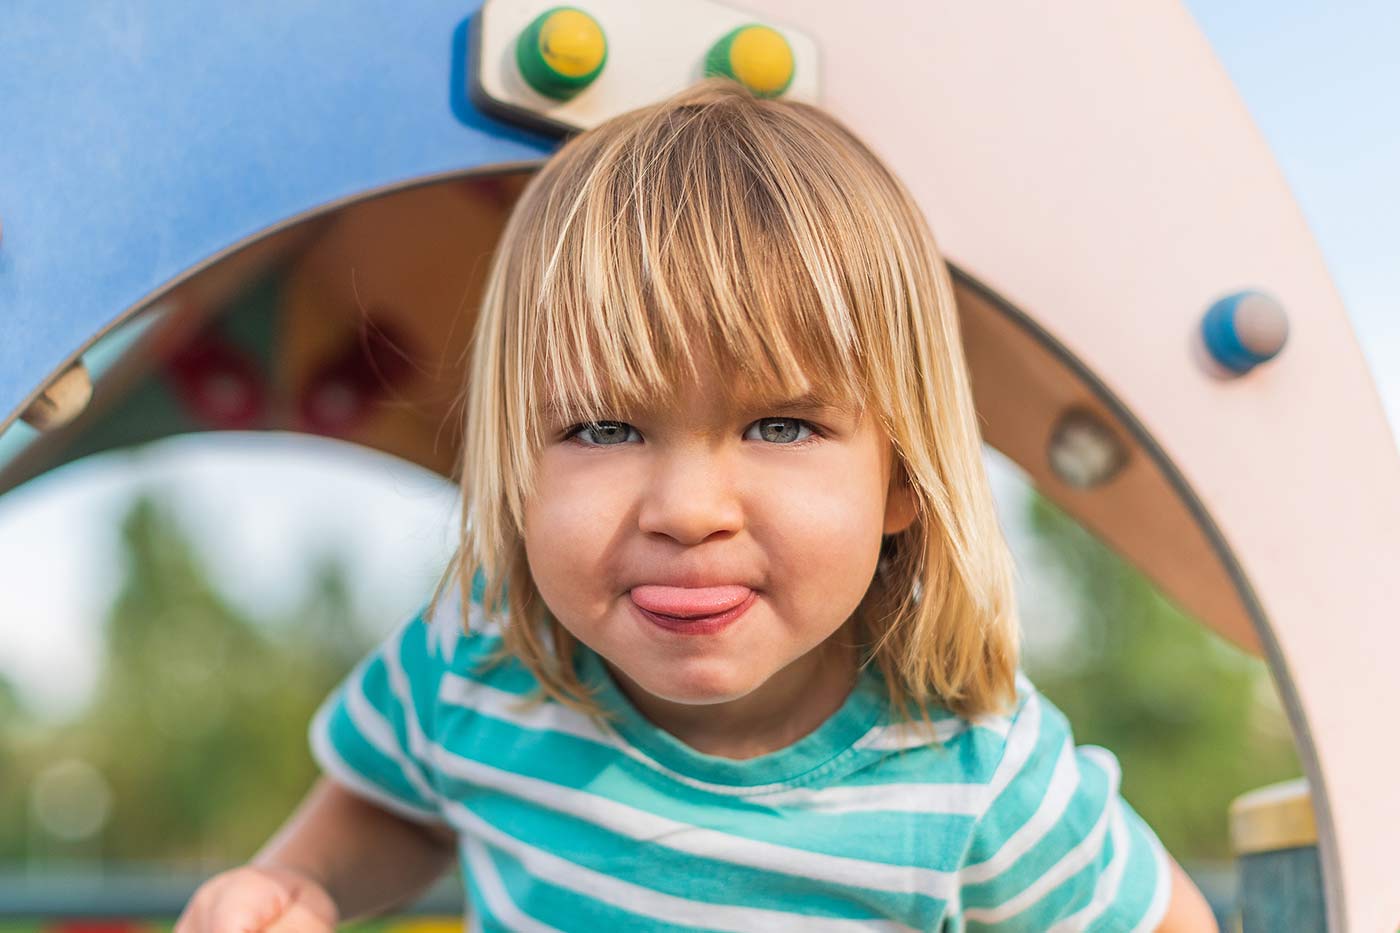 9 Warning Signs of a Spoiled Child